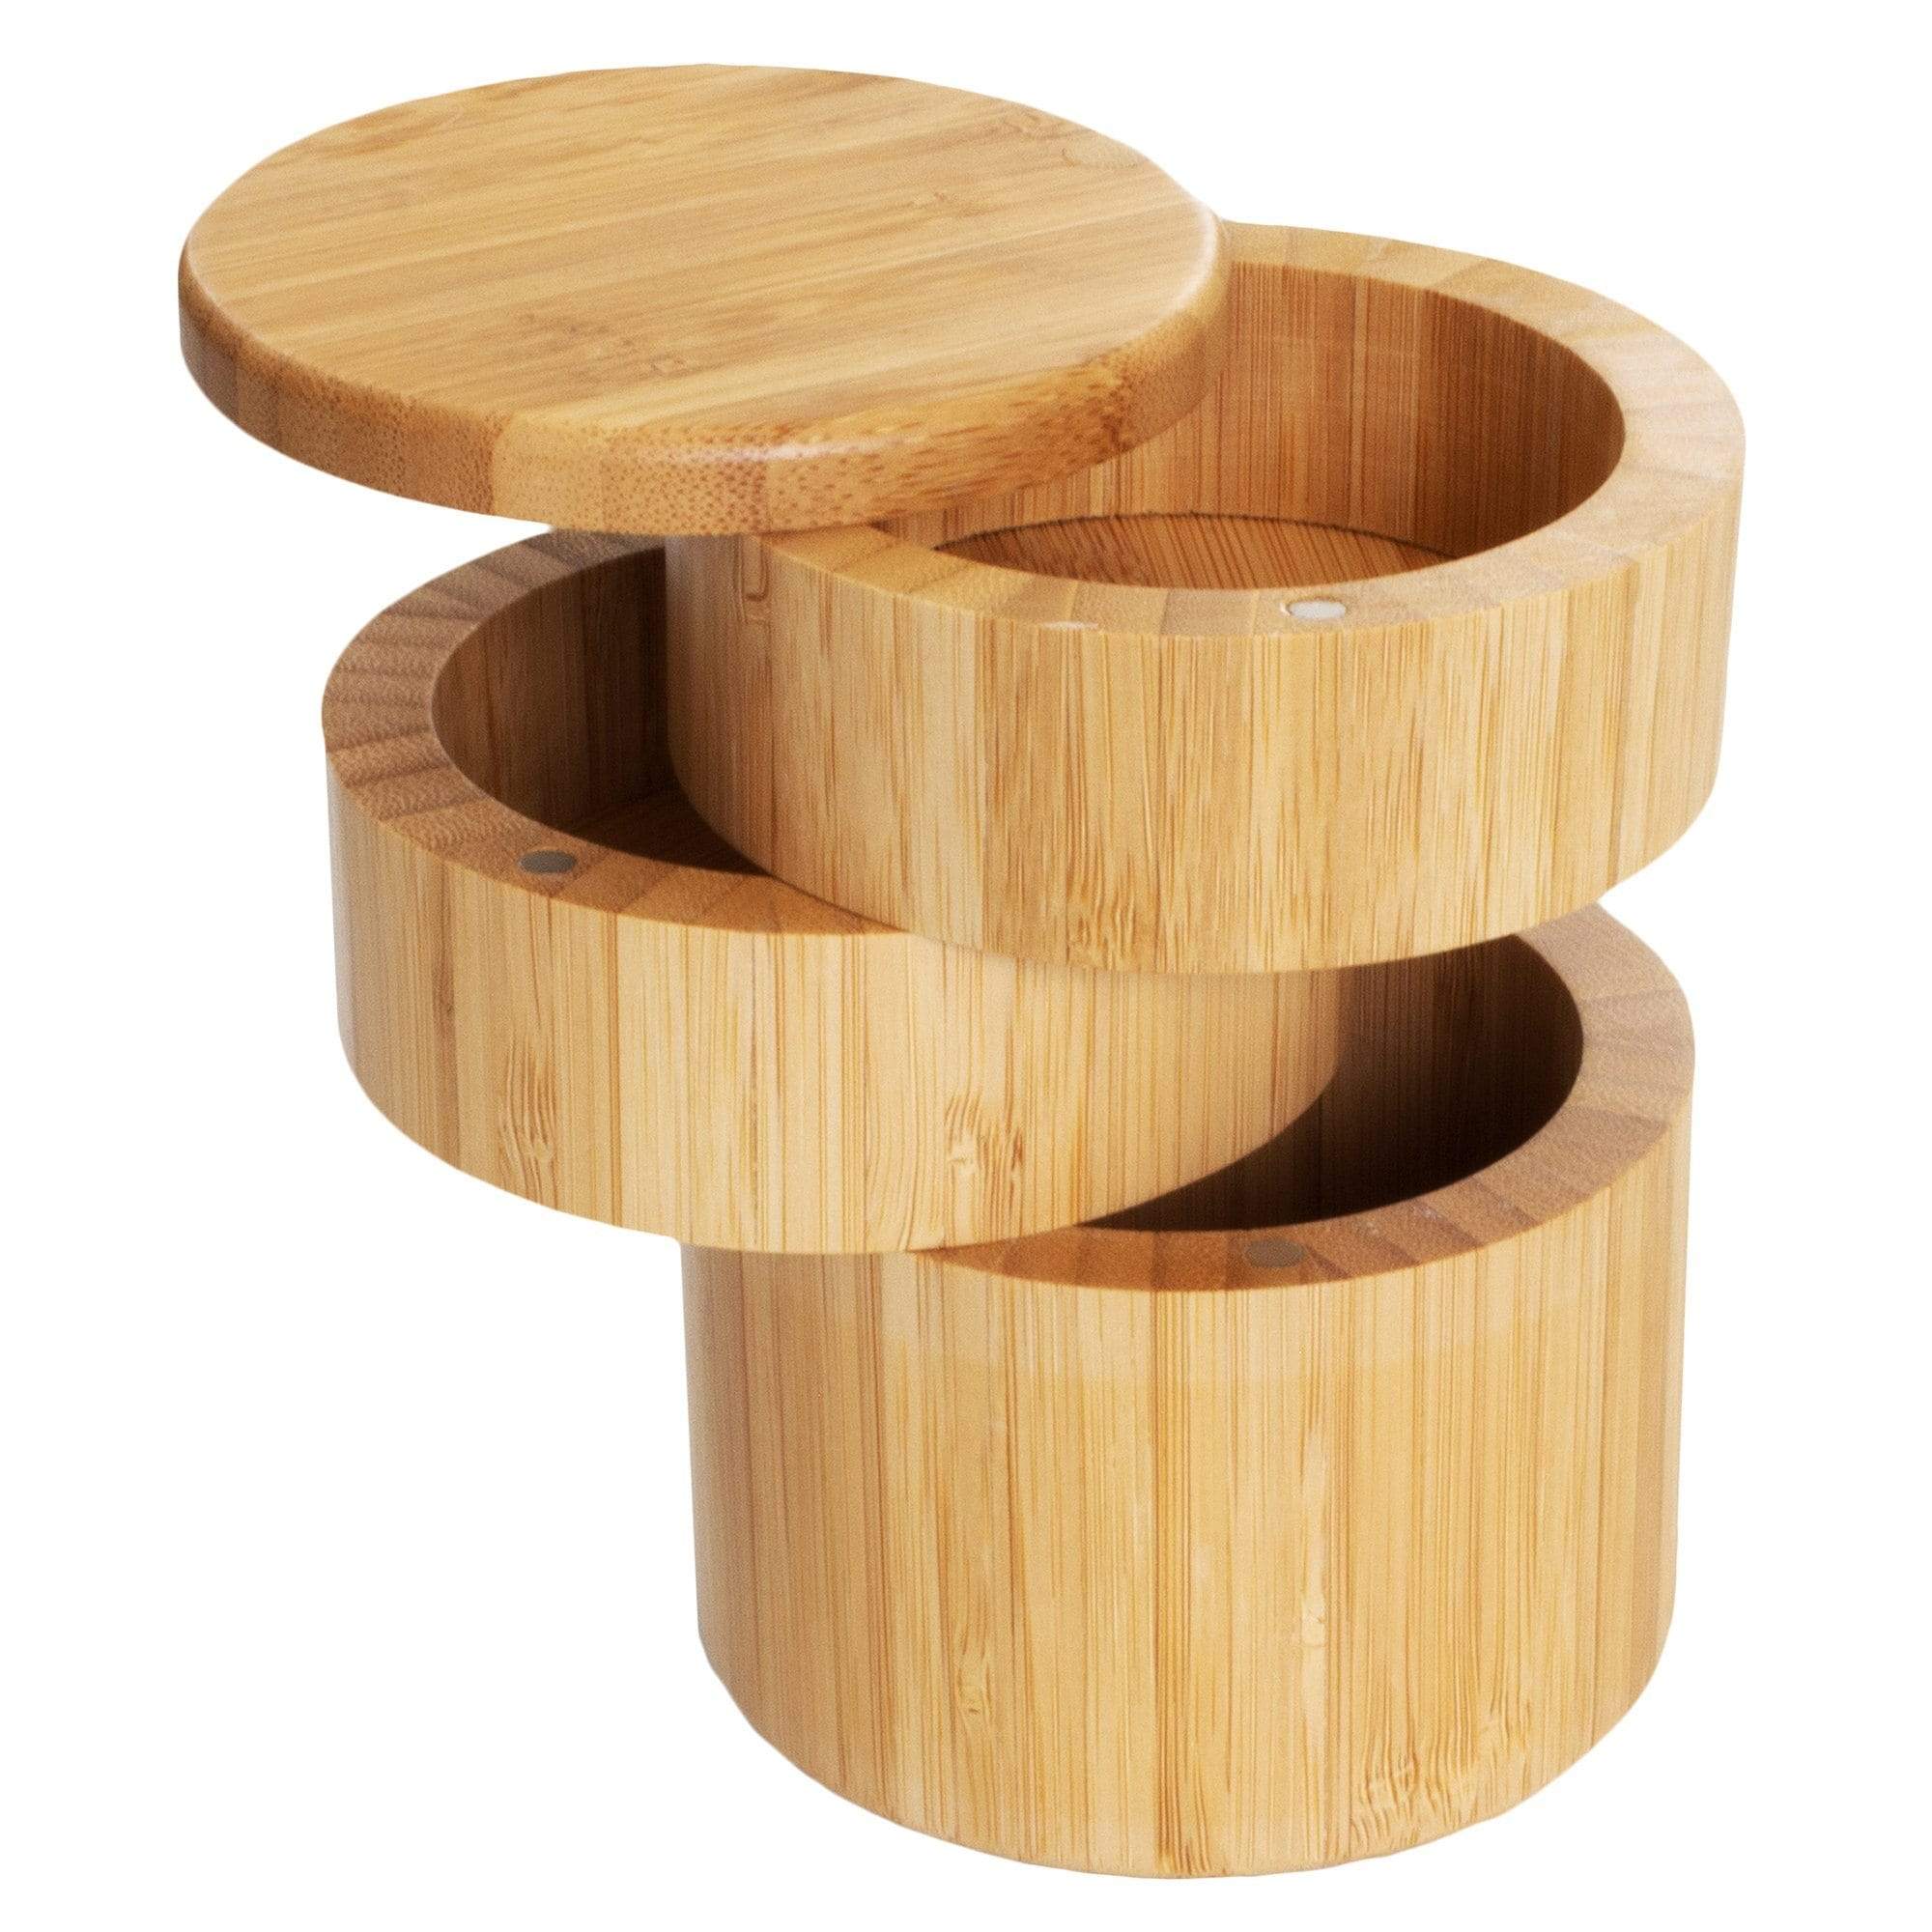 Totally Bamboo Salt Cellar with Magnetic Swivel Lid, Take Life